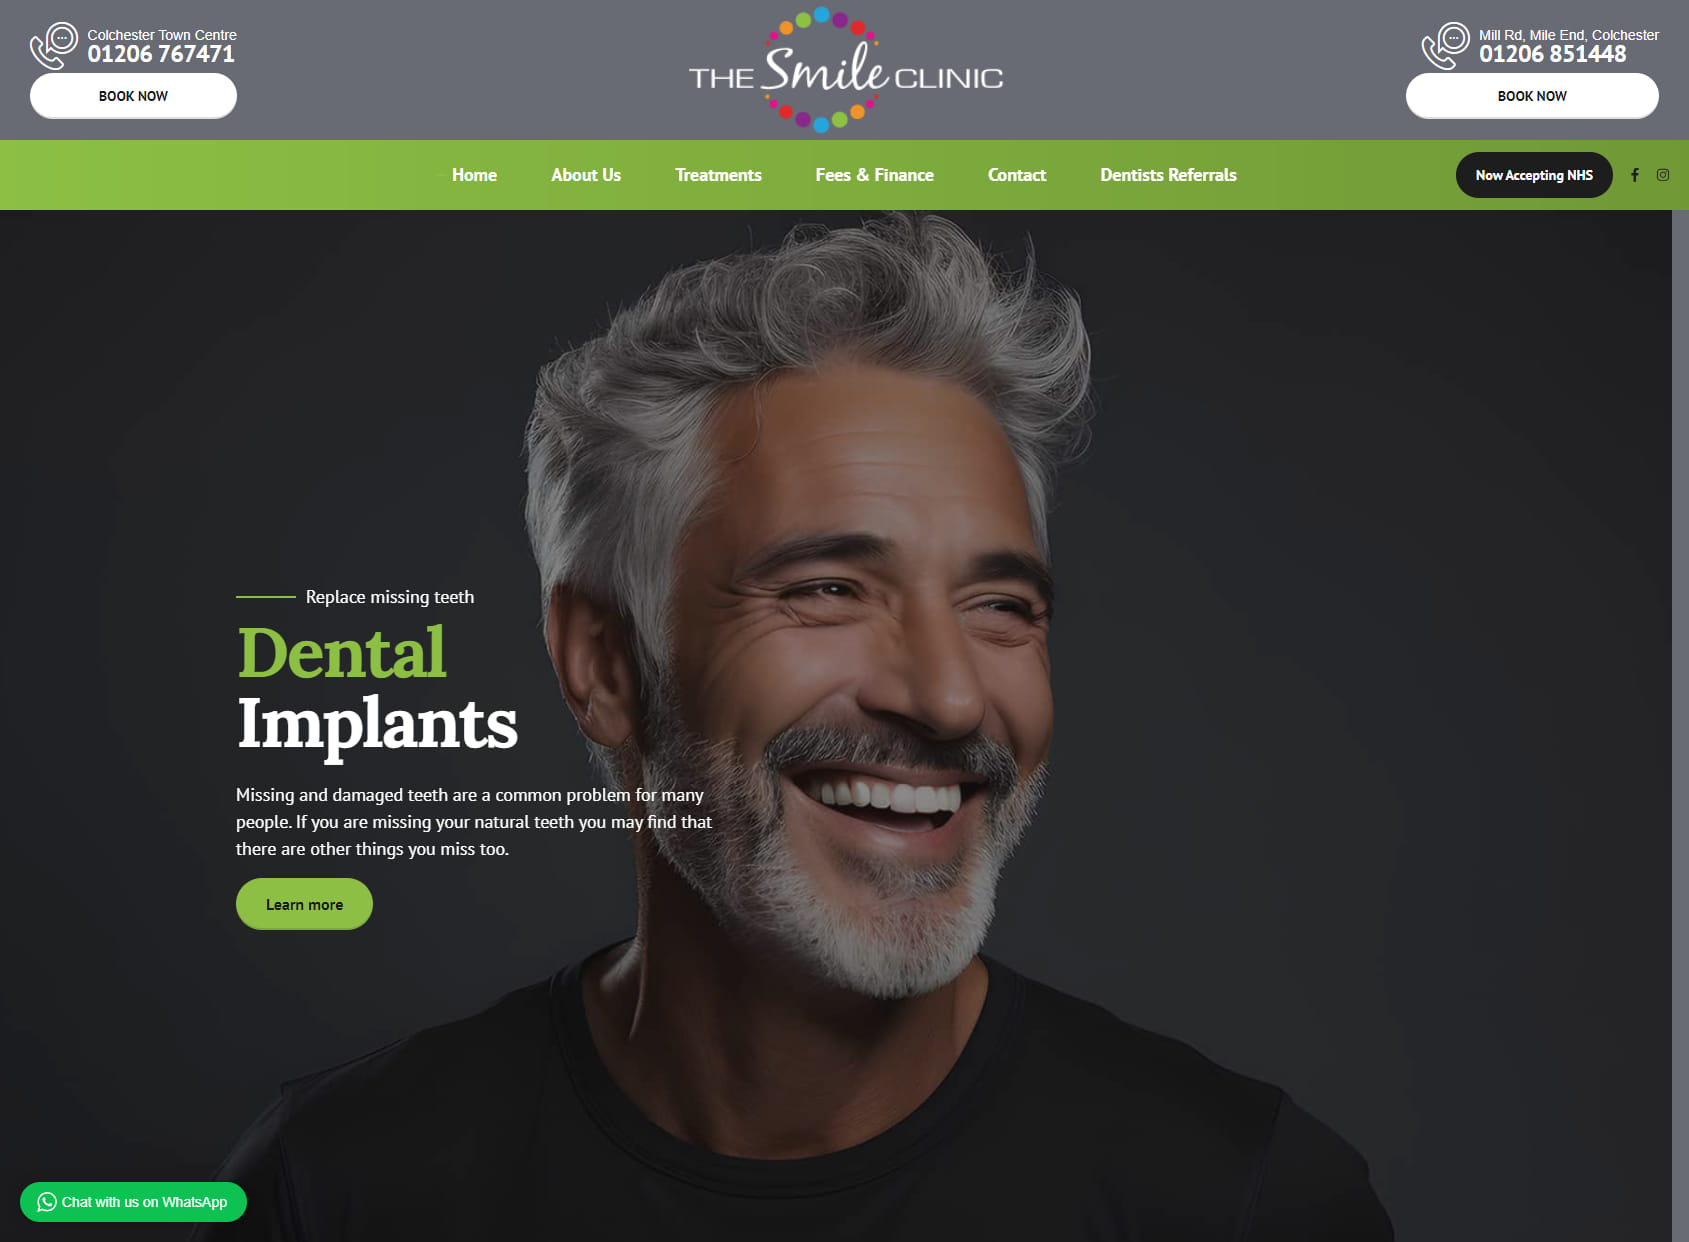 The Smile Clinic Cosmetic Dentistry & Implant Centre